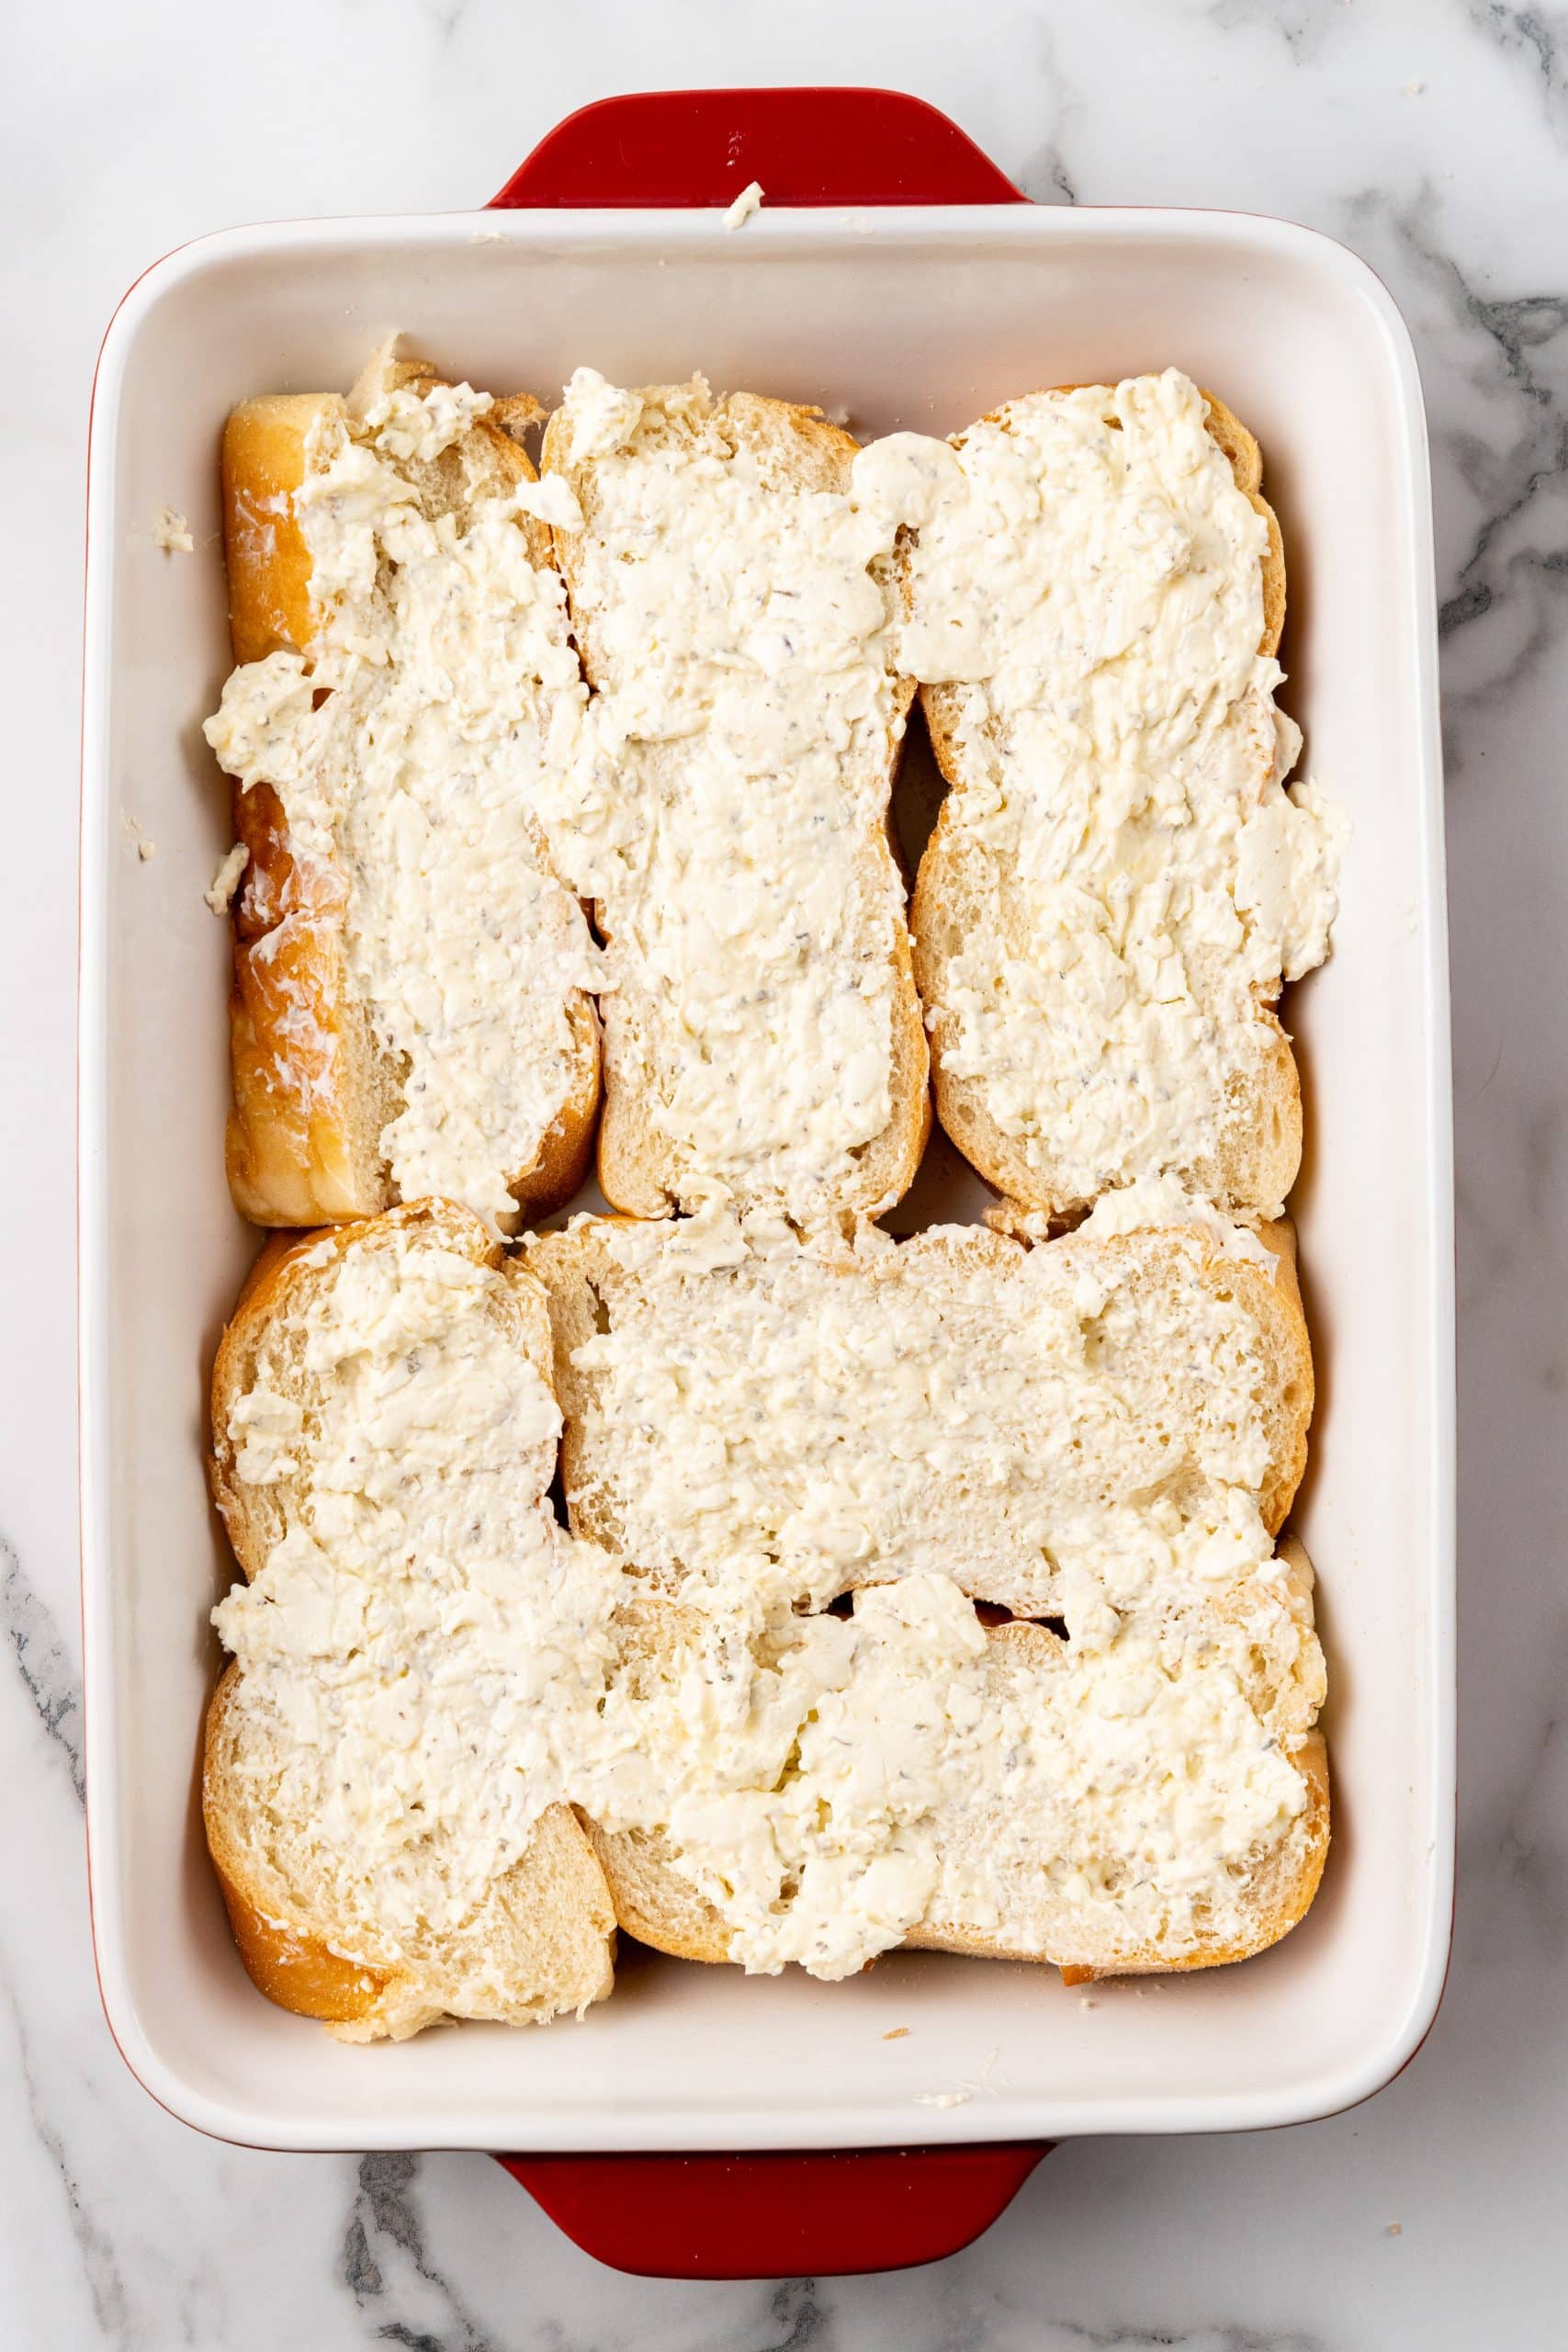 seasoned cream cheese mixture spread over thick slices of bread in a white baking dish